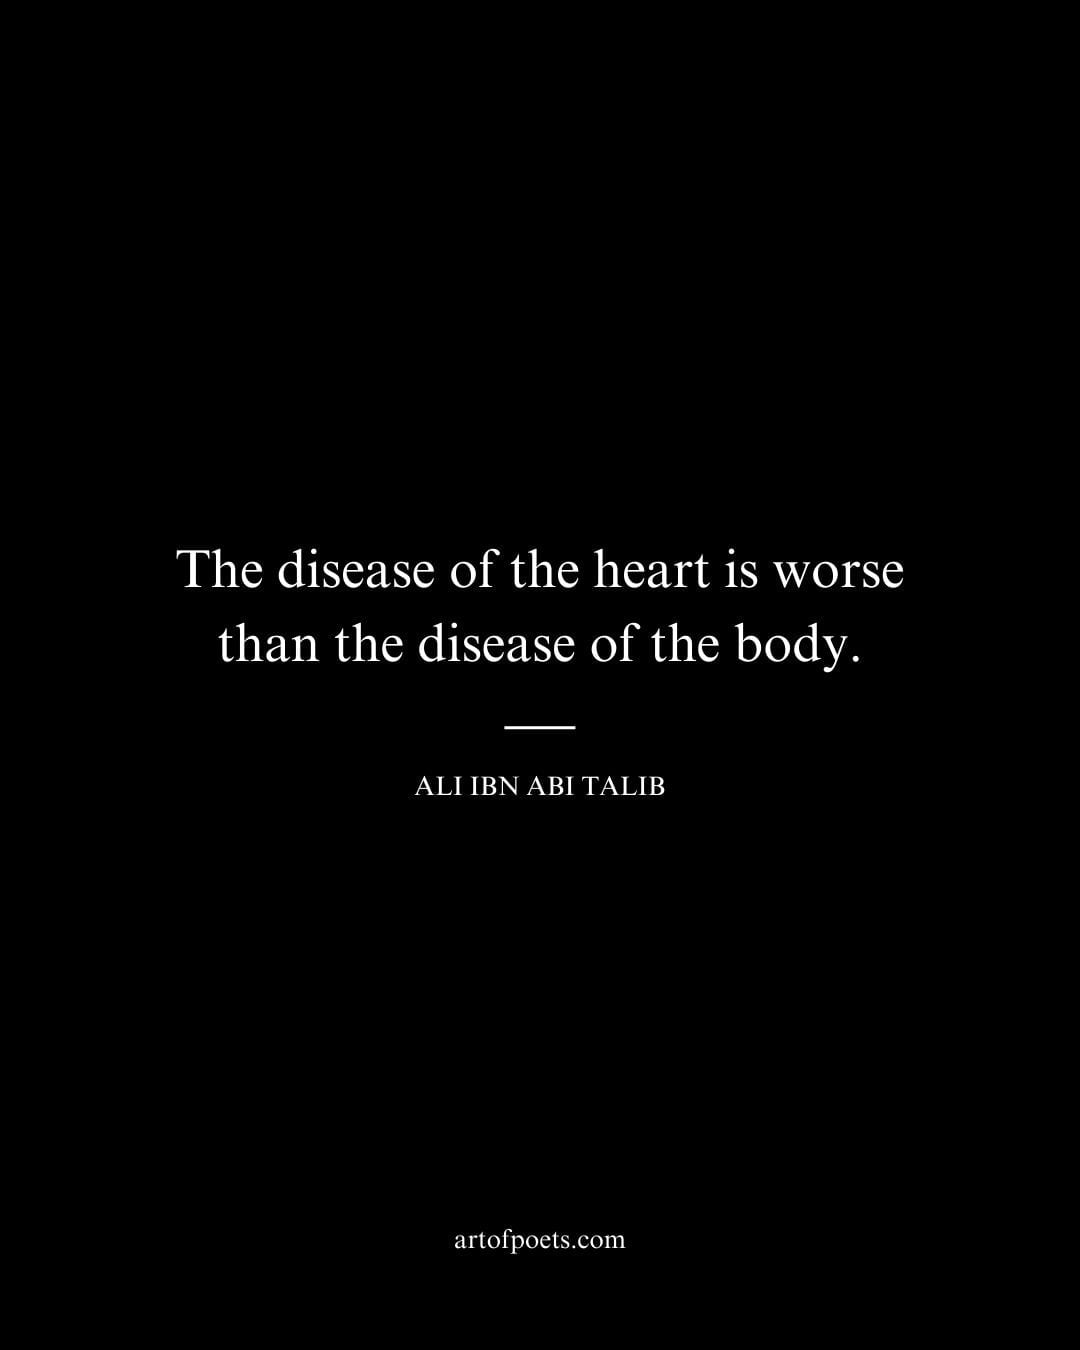 The disease of the heart is worse than the disease of the body